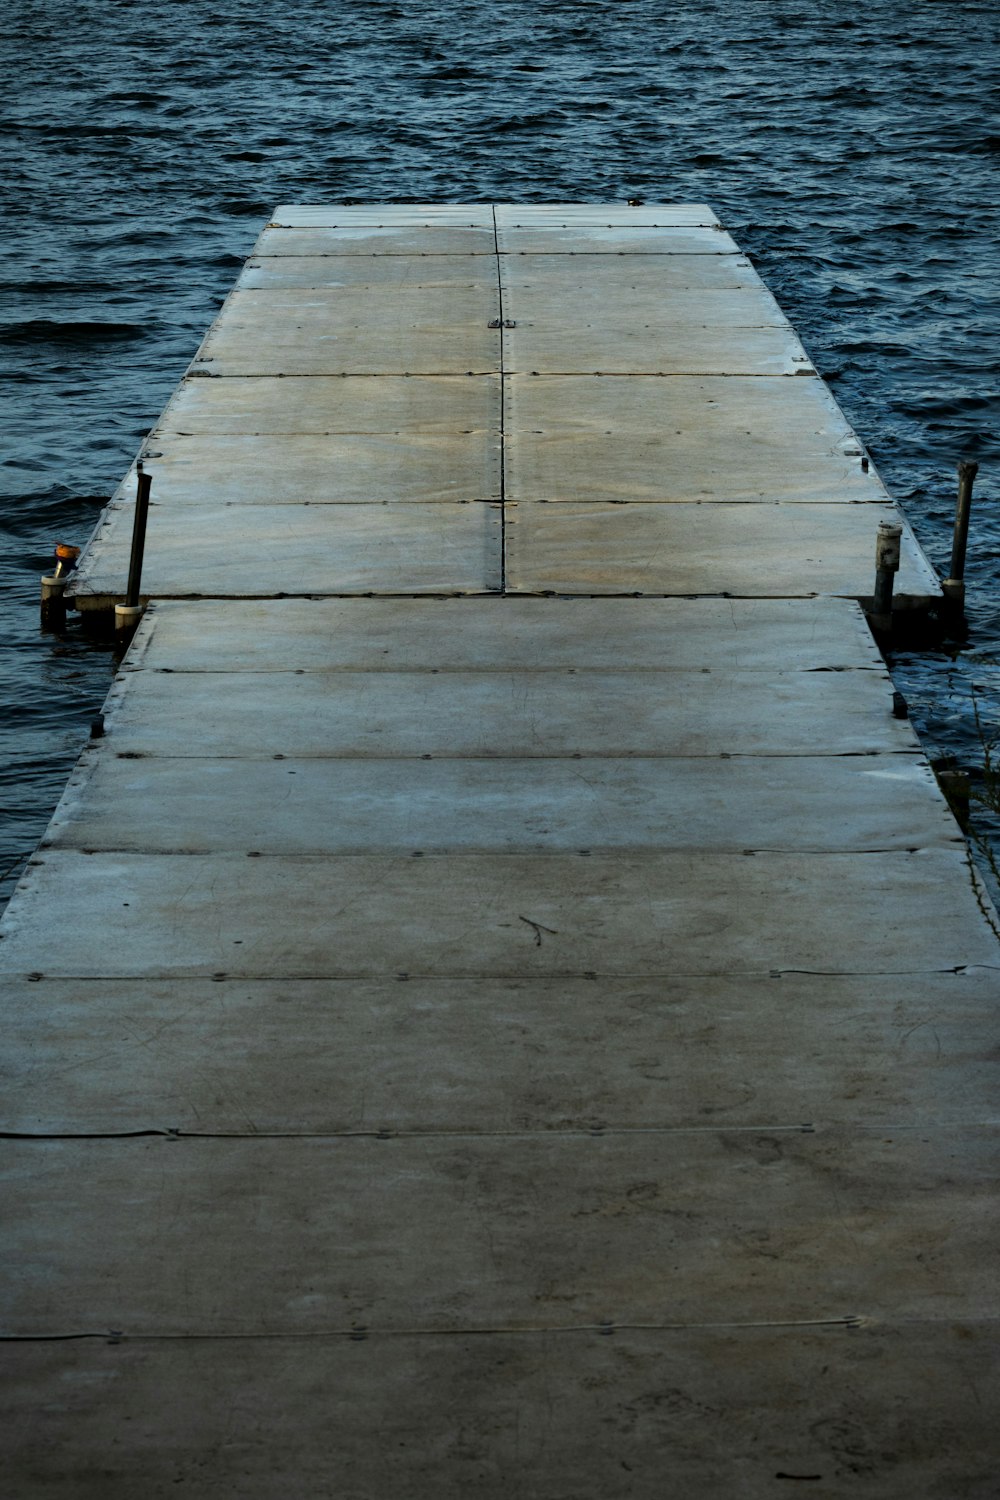 a dock with a bird sitting on the end of it